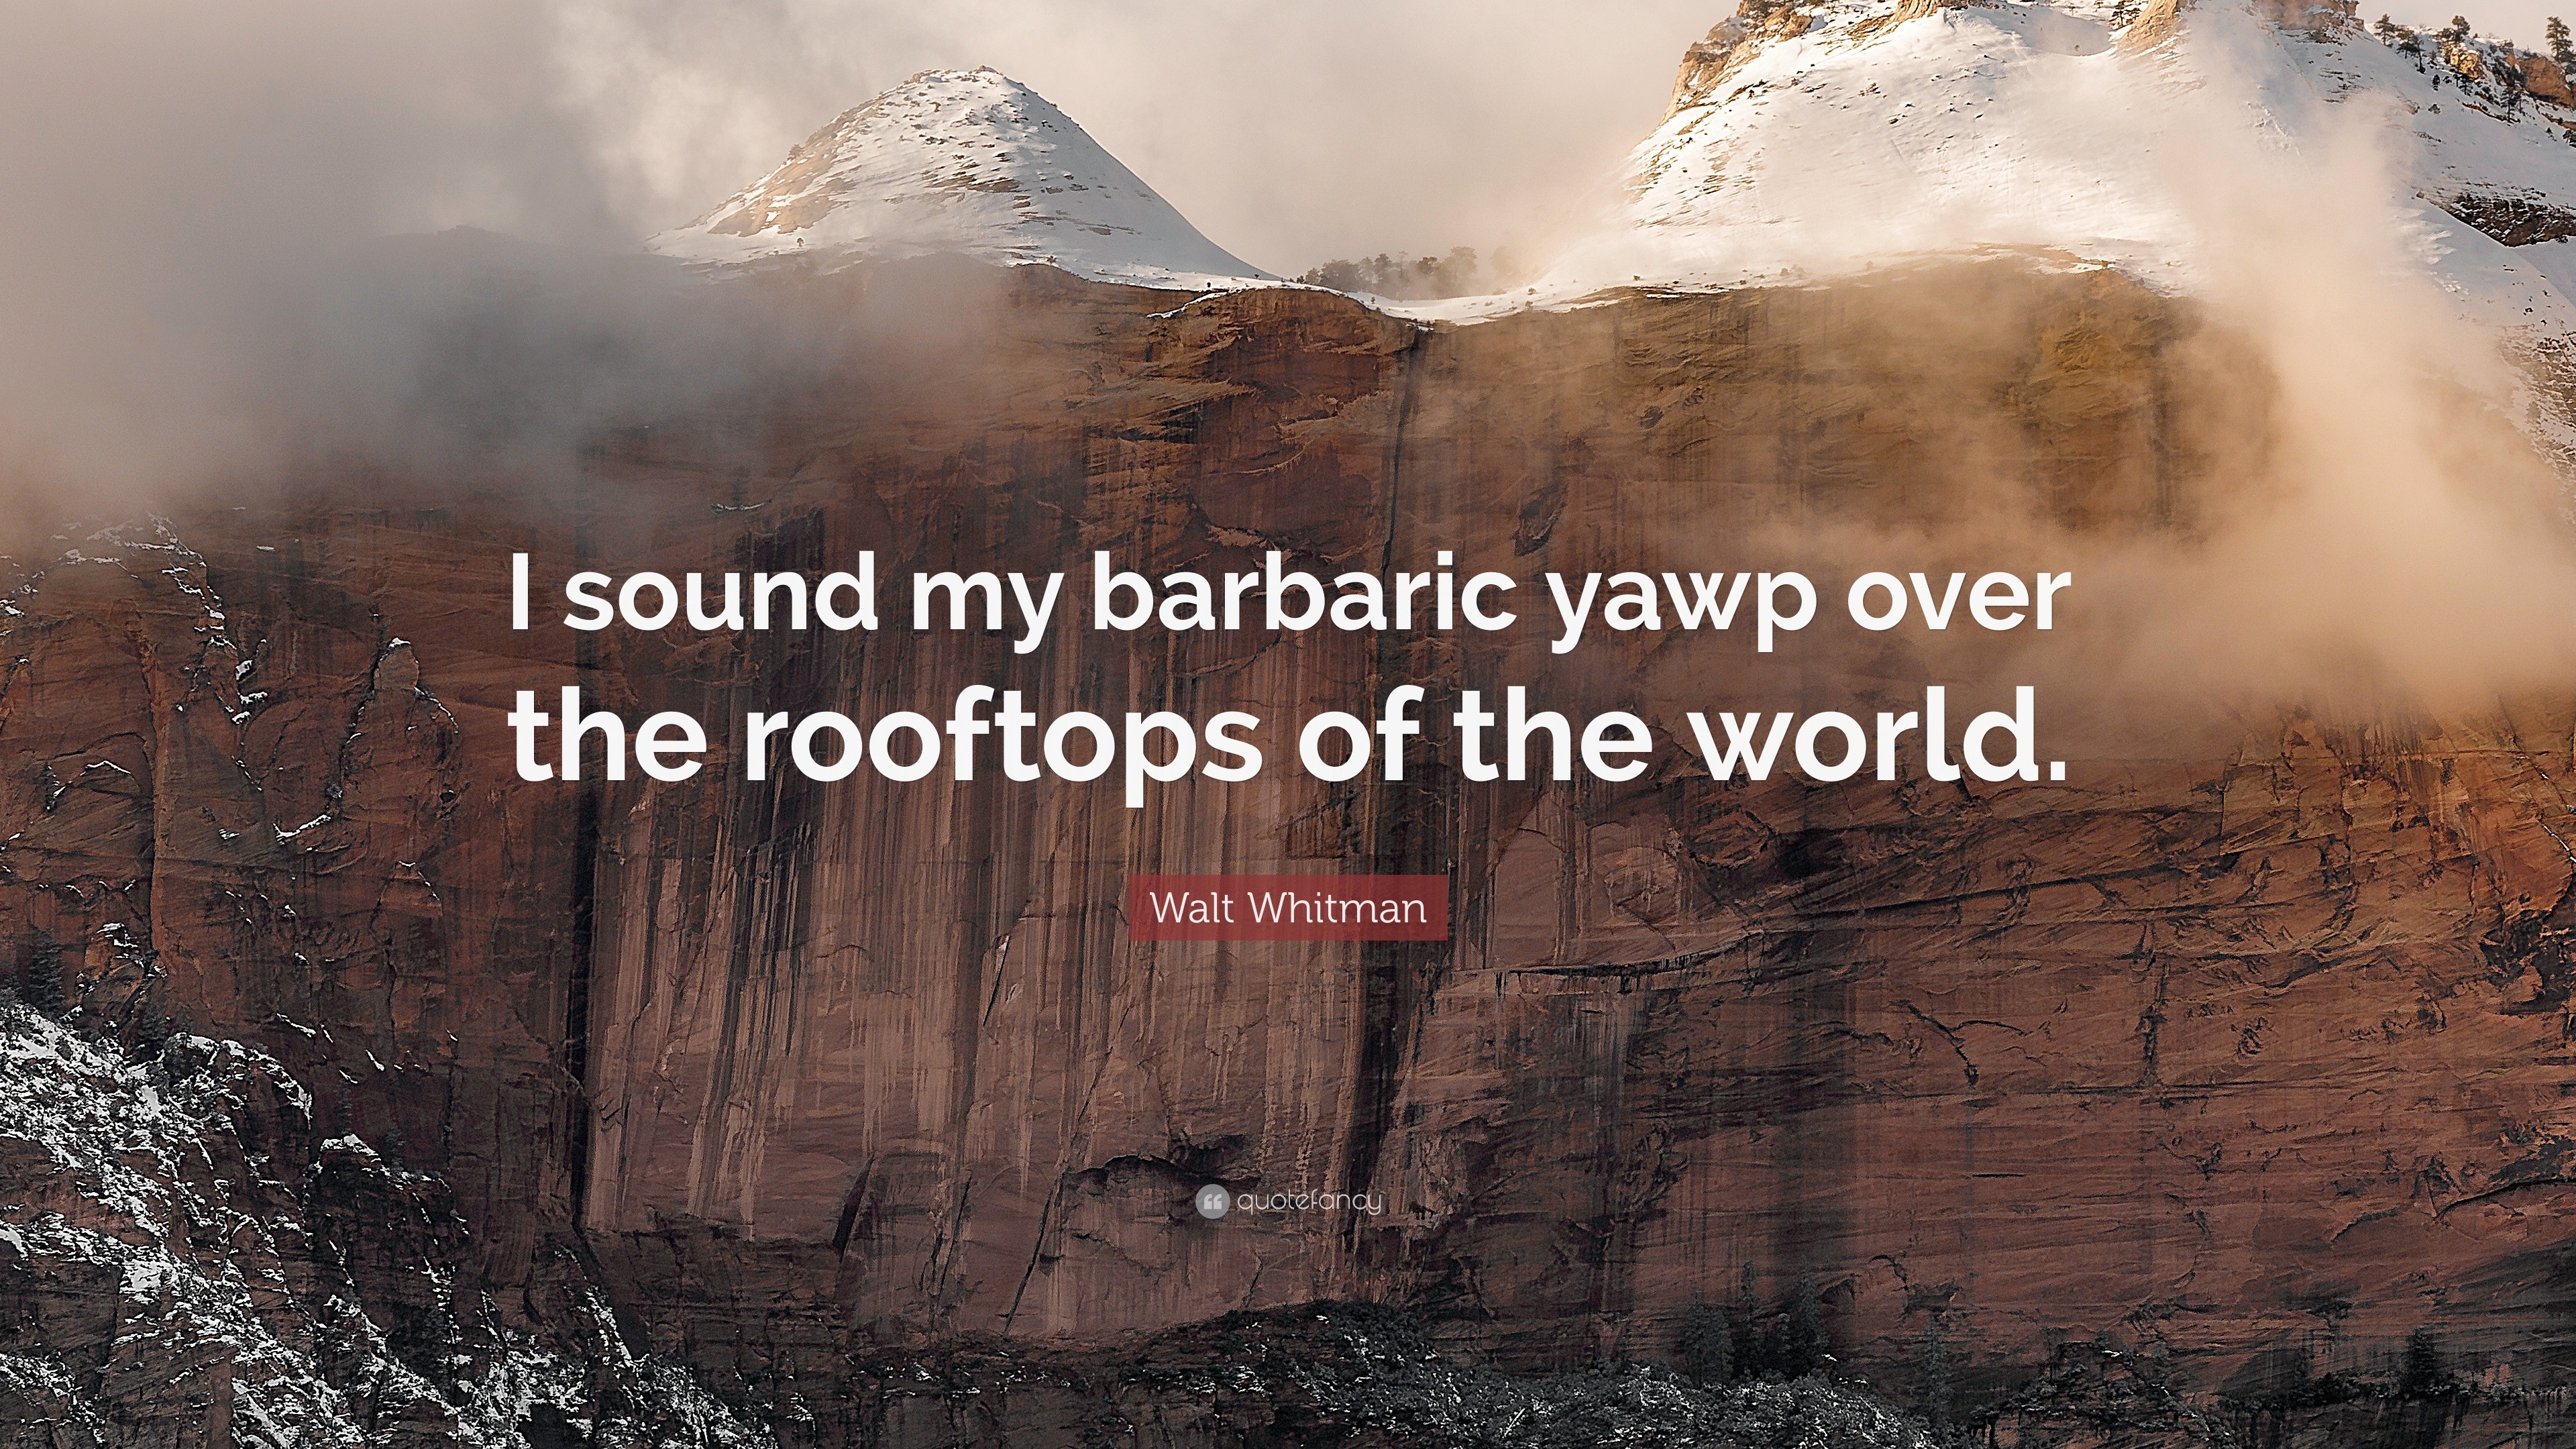 Walt Whitman Quote “I sound my barbaric yawp over the rooftops of the world.” (12 wallpapers